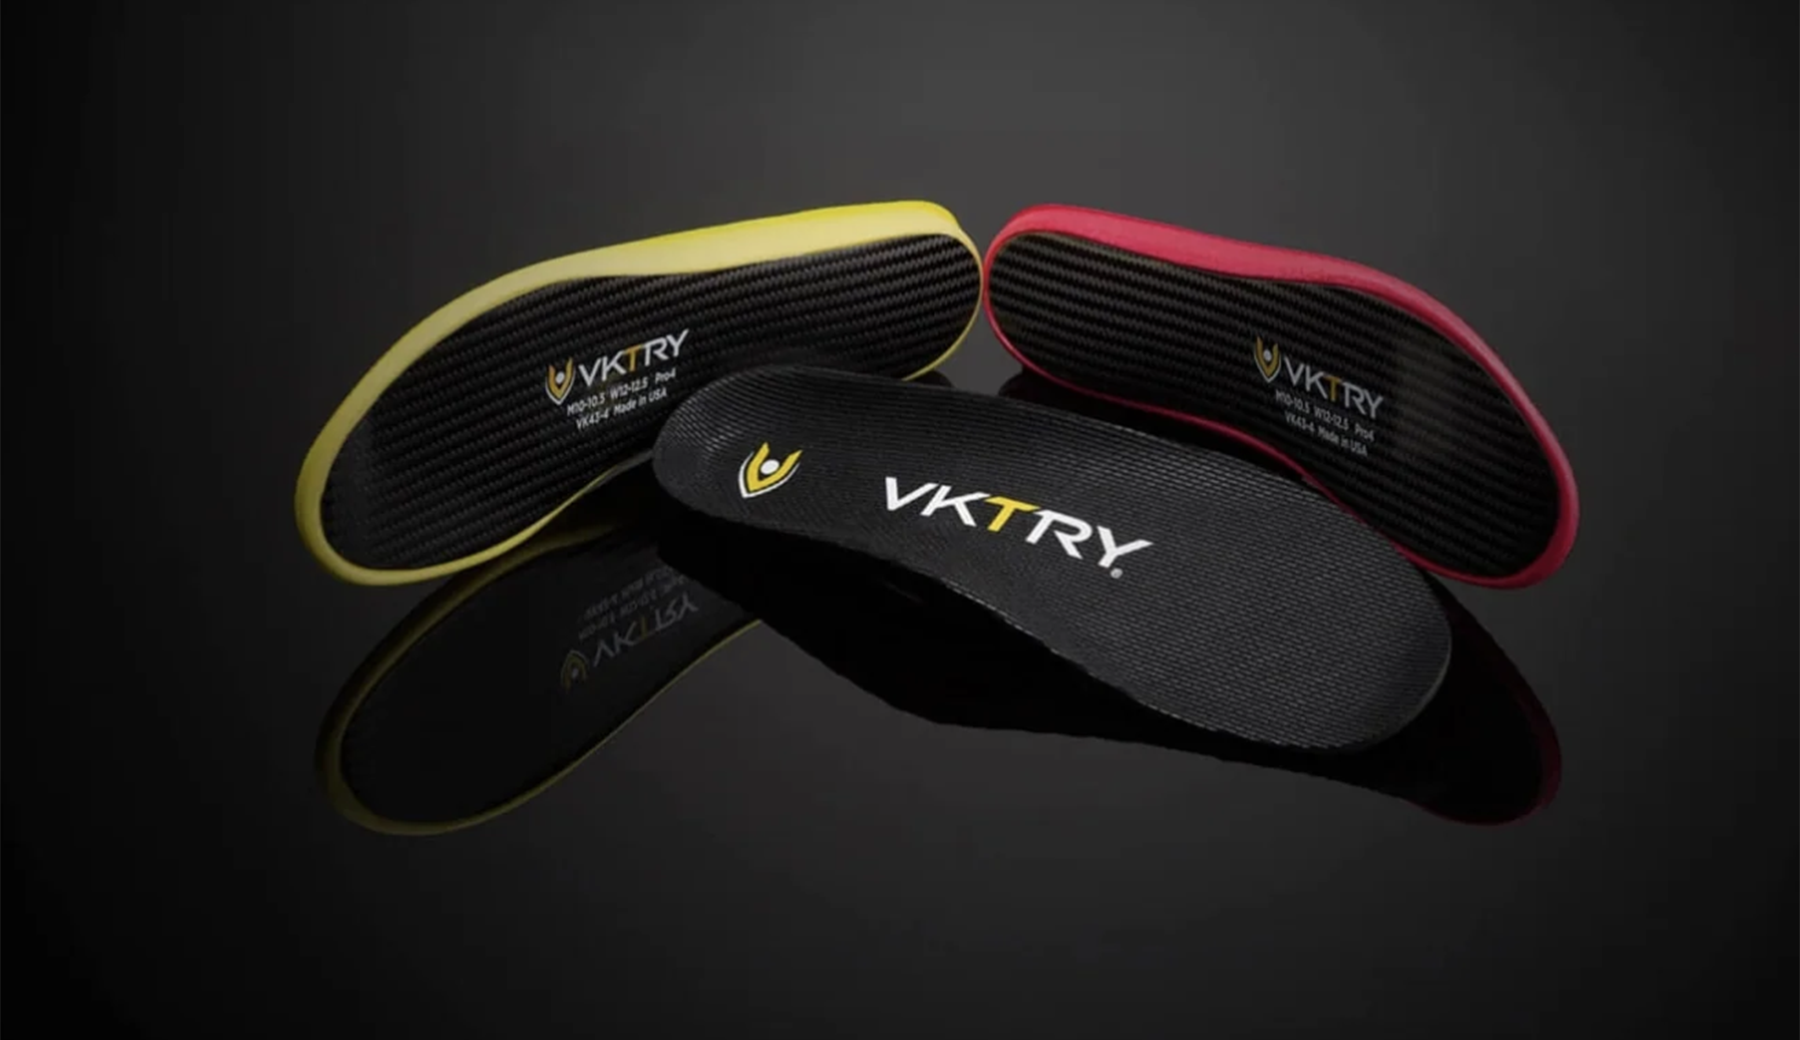 Vktry’s Gold Performance ‘Double Jump’ Insoles Go Viral on TikTok